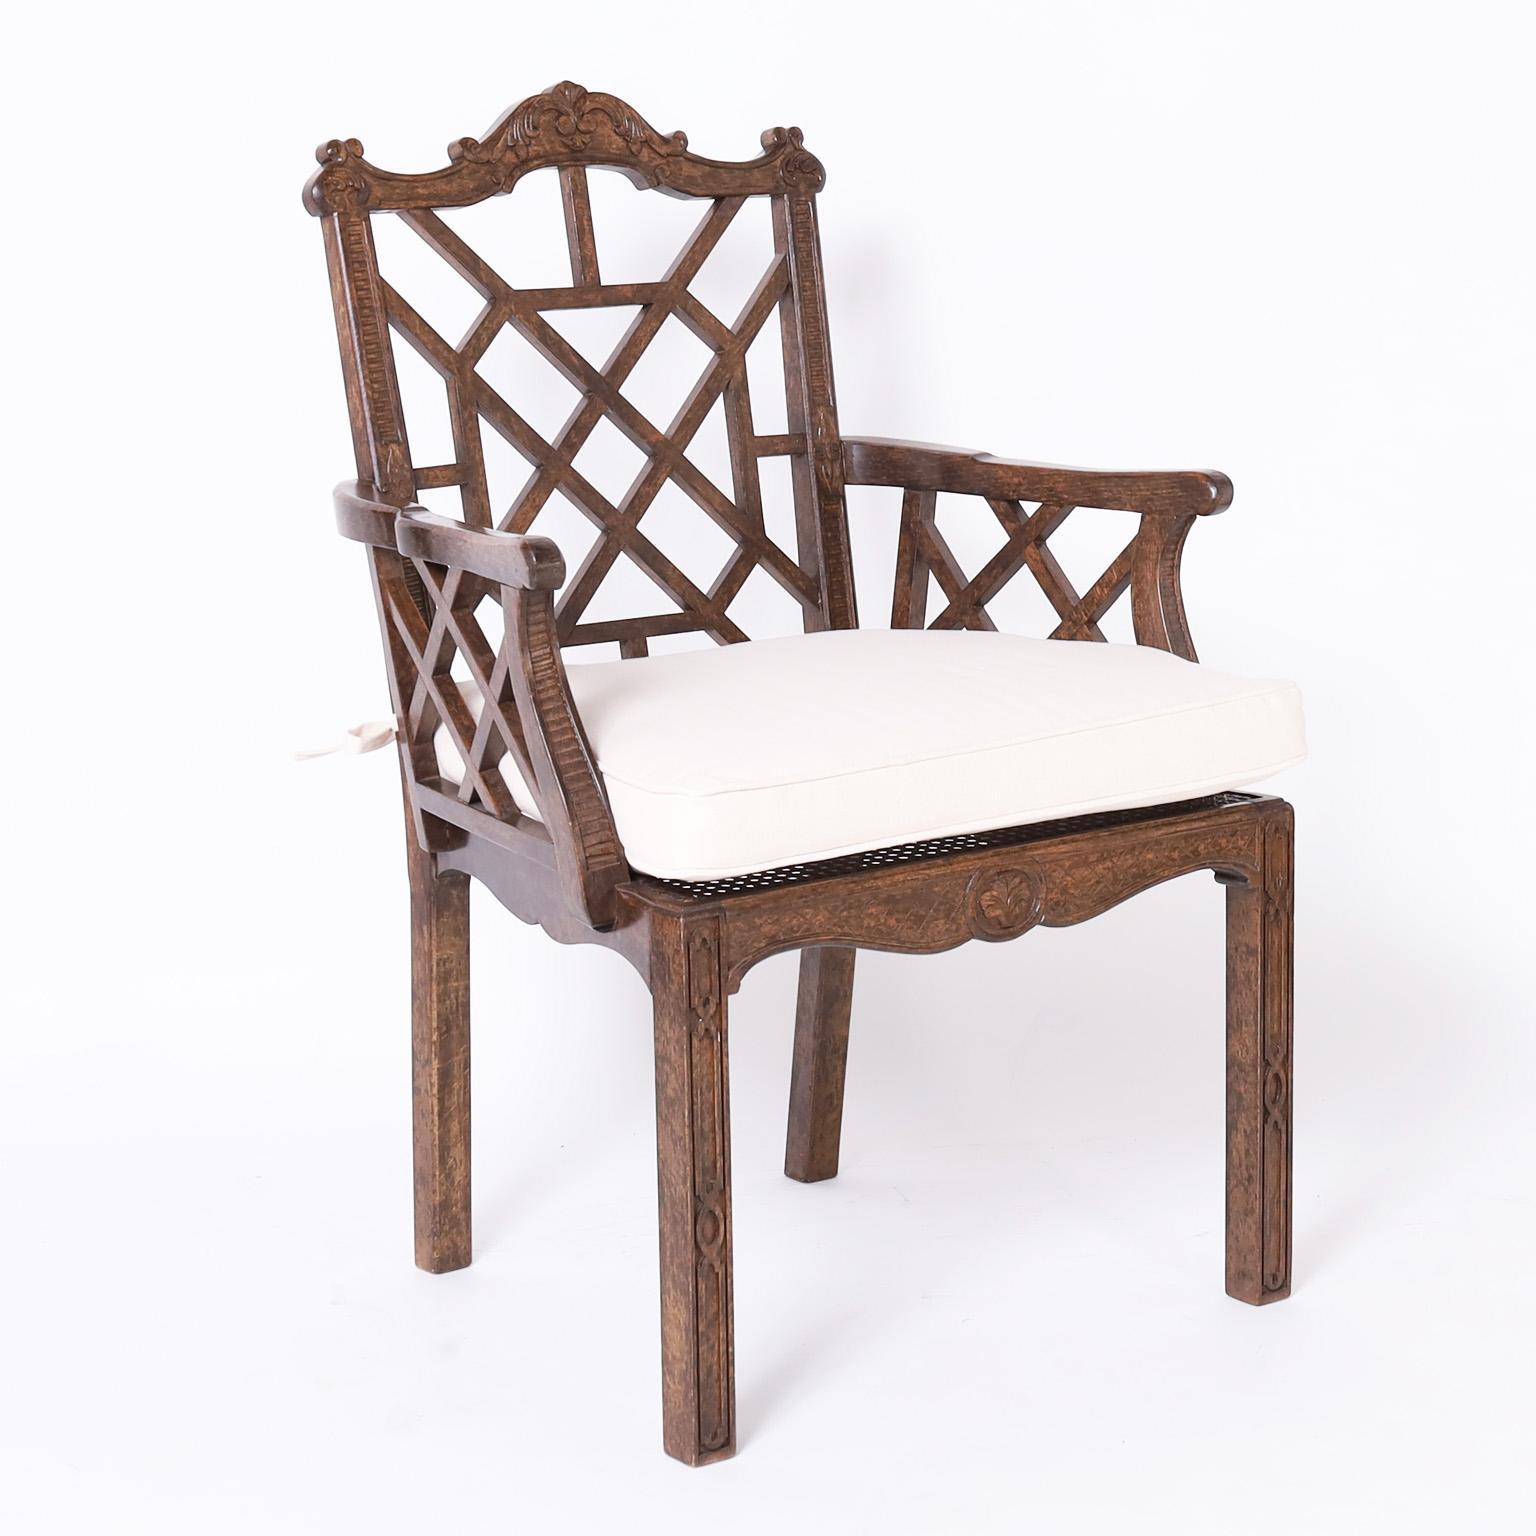 Impressive set of ten armchairs crafted, in the mid 20th C, in beechwood in the Chinese Chippendale manner with a carved serpentine crest rail, lattice panels on the back and sides, caned seats and classic legs.